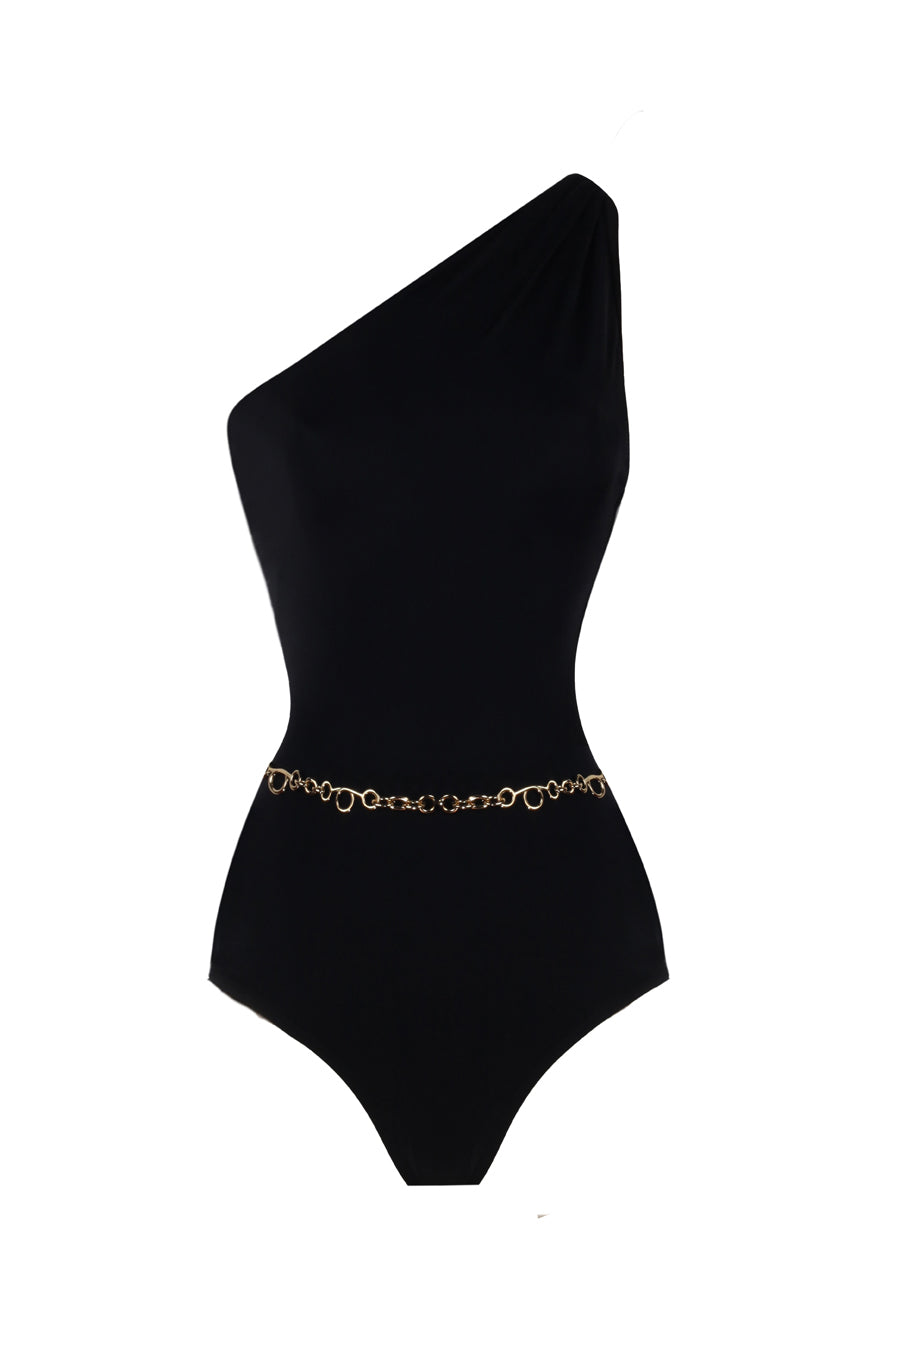 Odette Black Swimsuit with Chain Belt